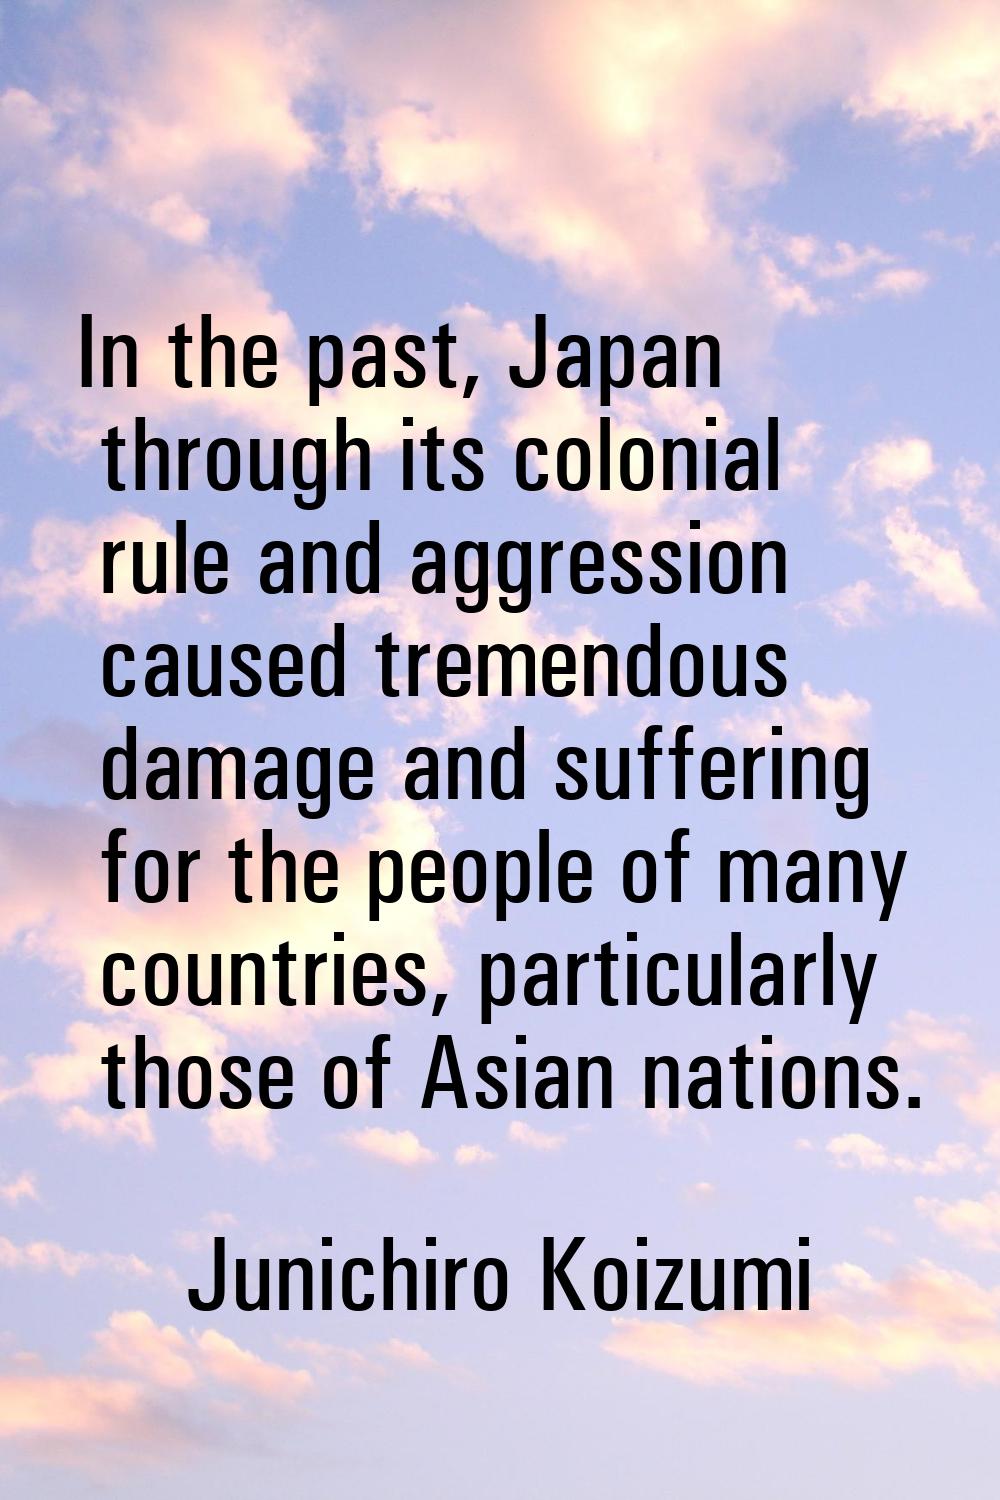 In the past, Japan through its colonial rule and aggression caused tremendous damage and suffering 